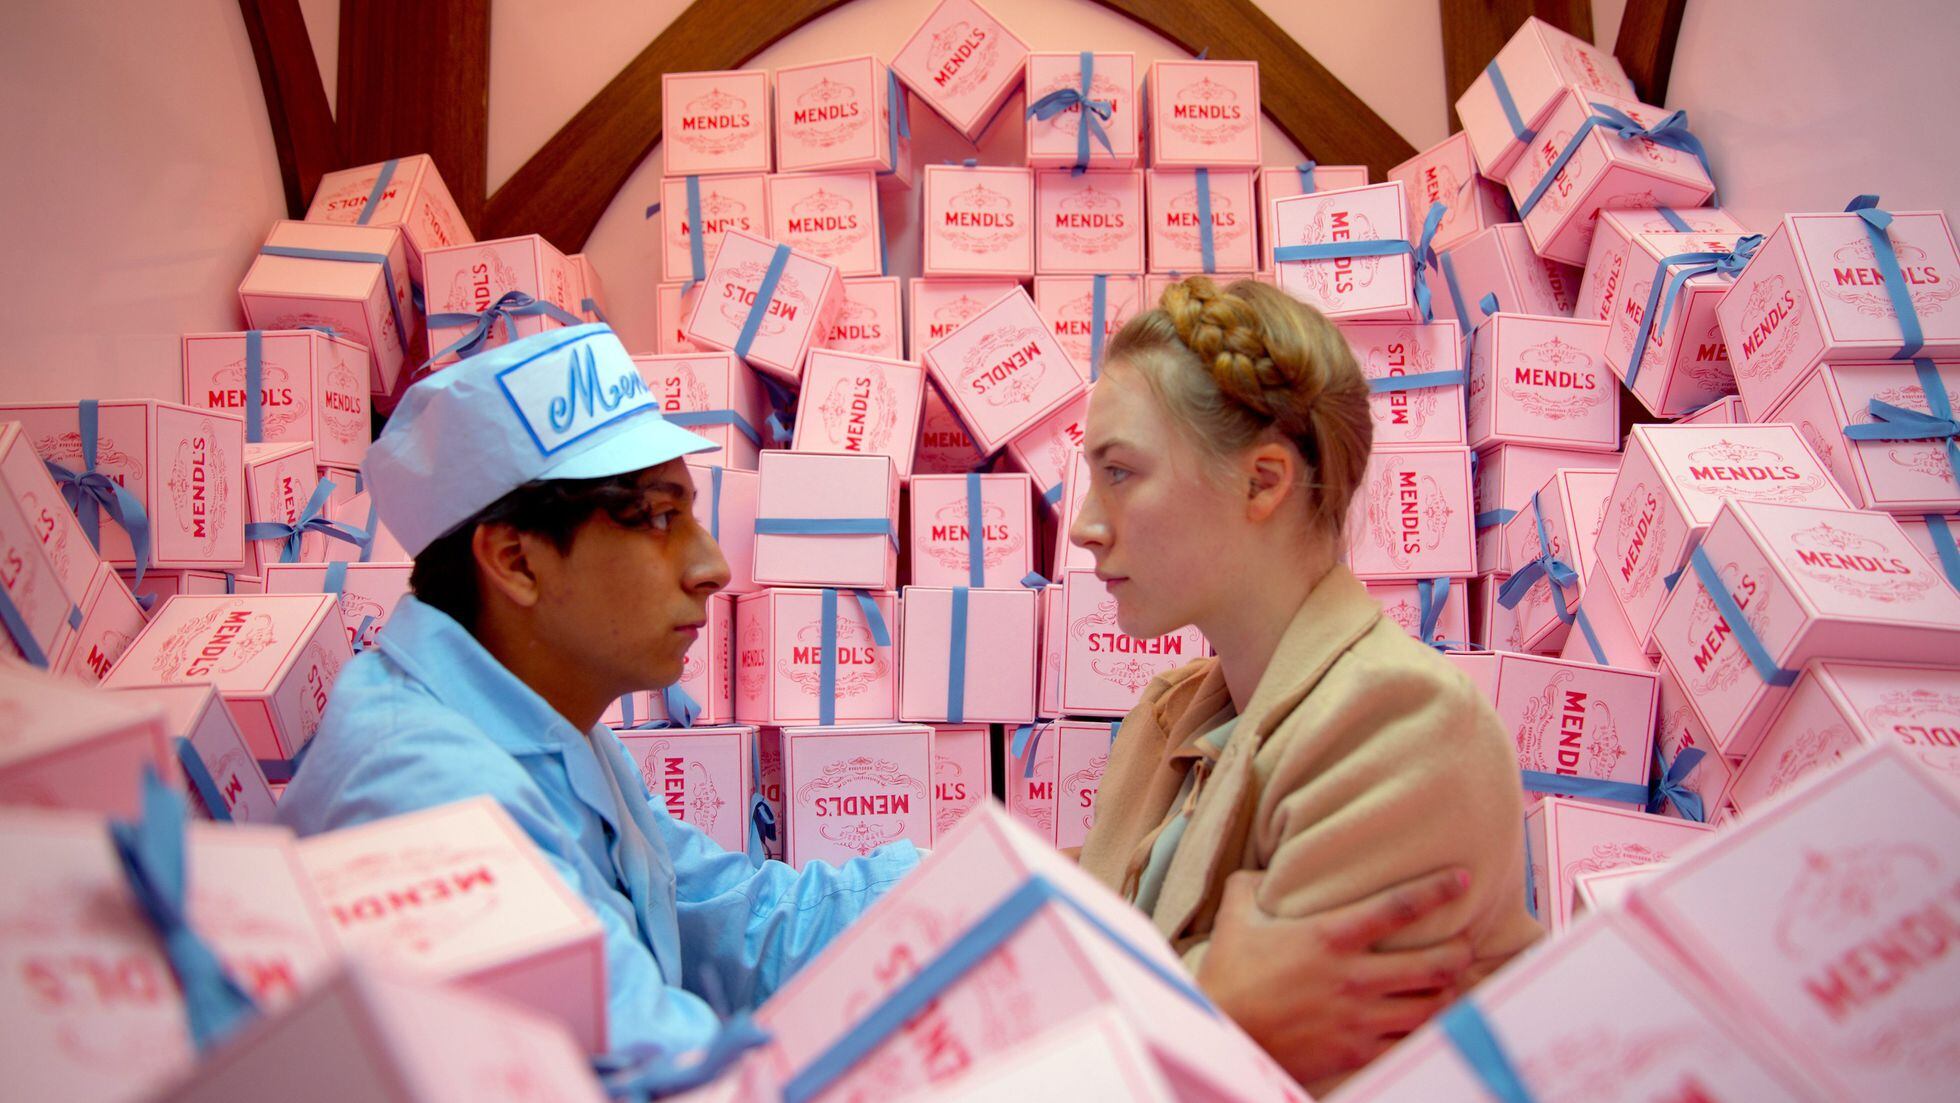 Where all of Wes Anderson's movies have been filmed